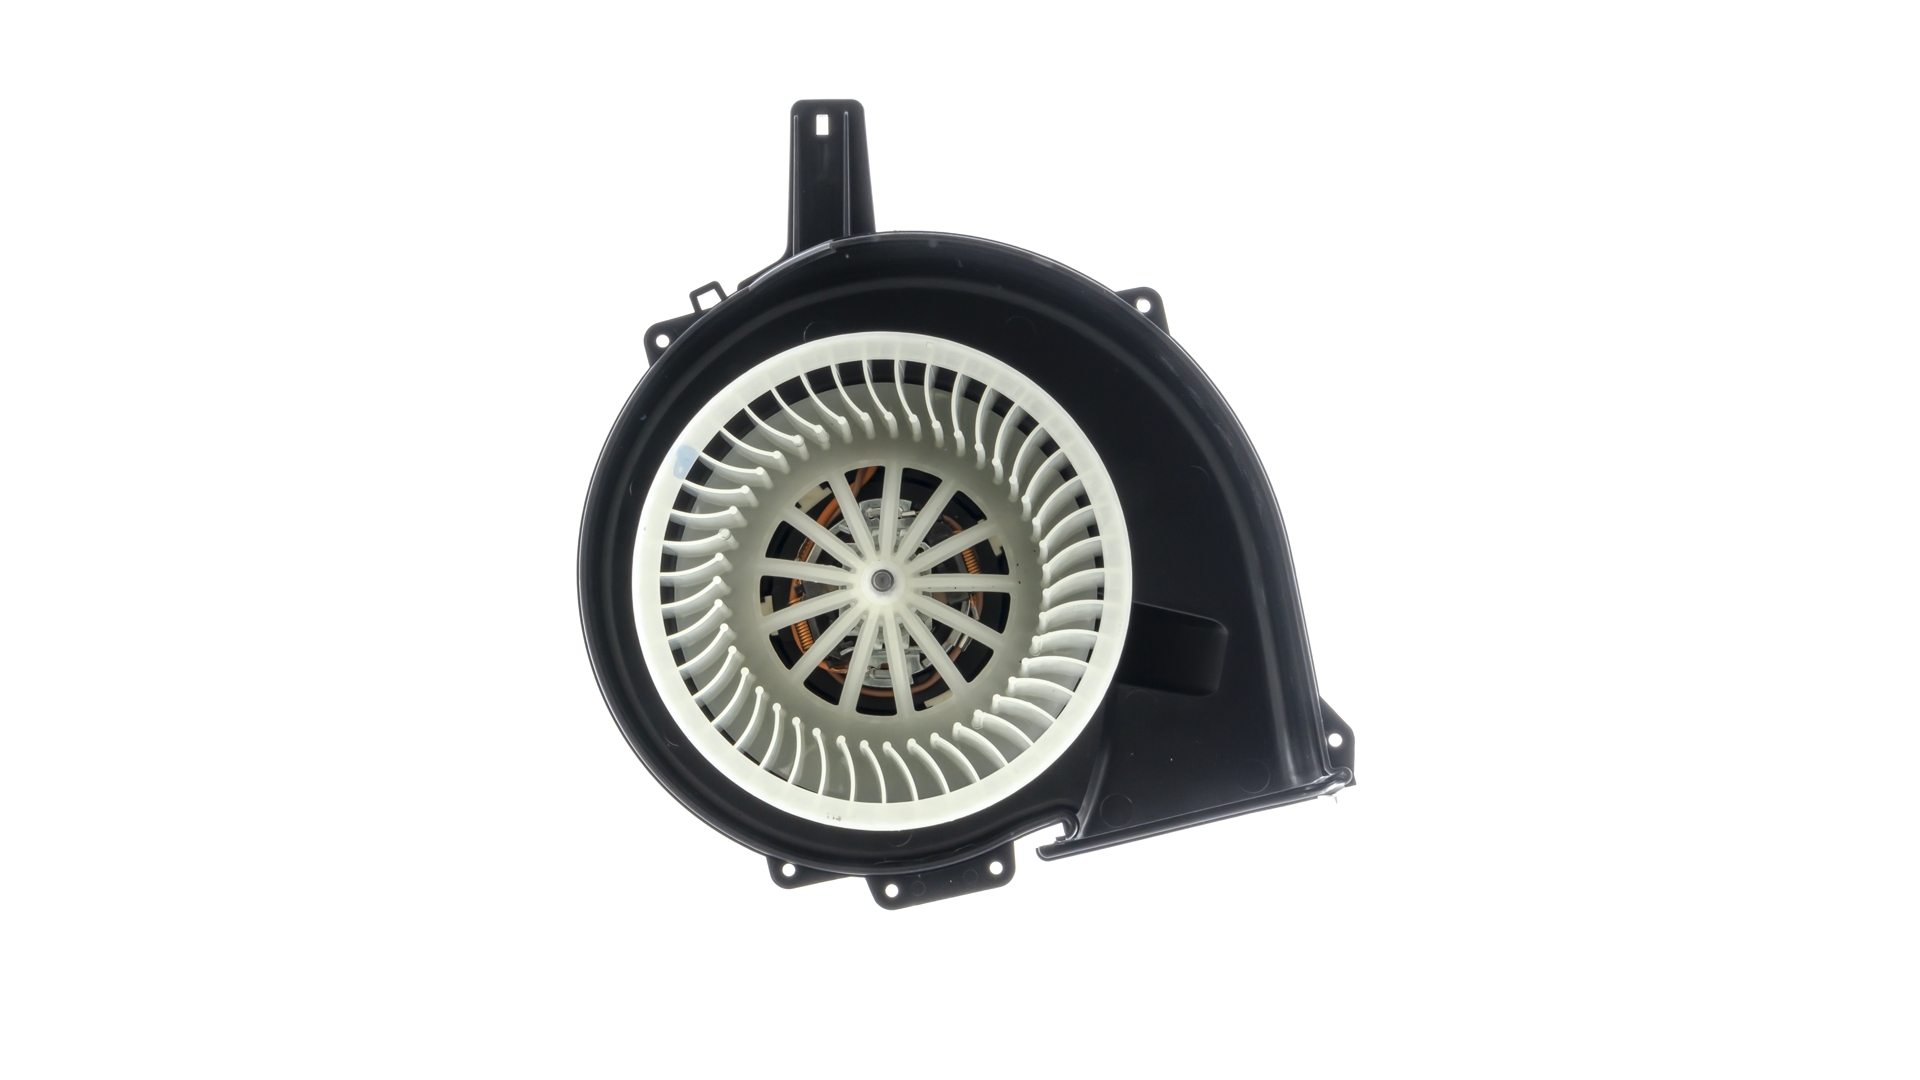 AB 21 000P MAHLE ORIGINAL Heater blower motor VW for vehicles without air conditioning, for right-hand drive vehicles